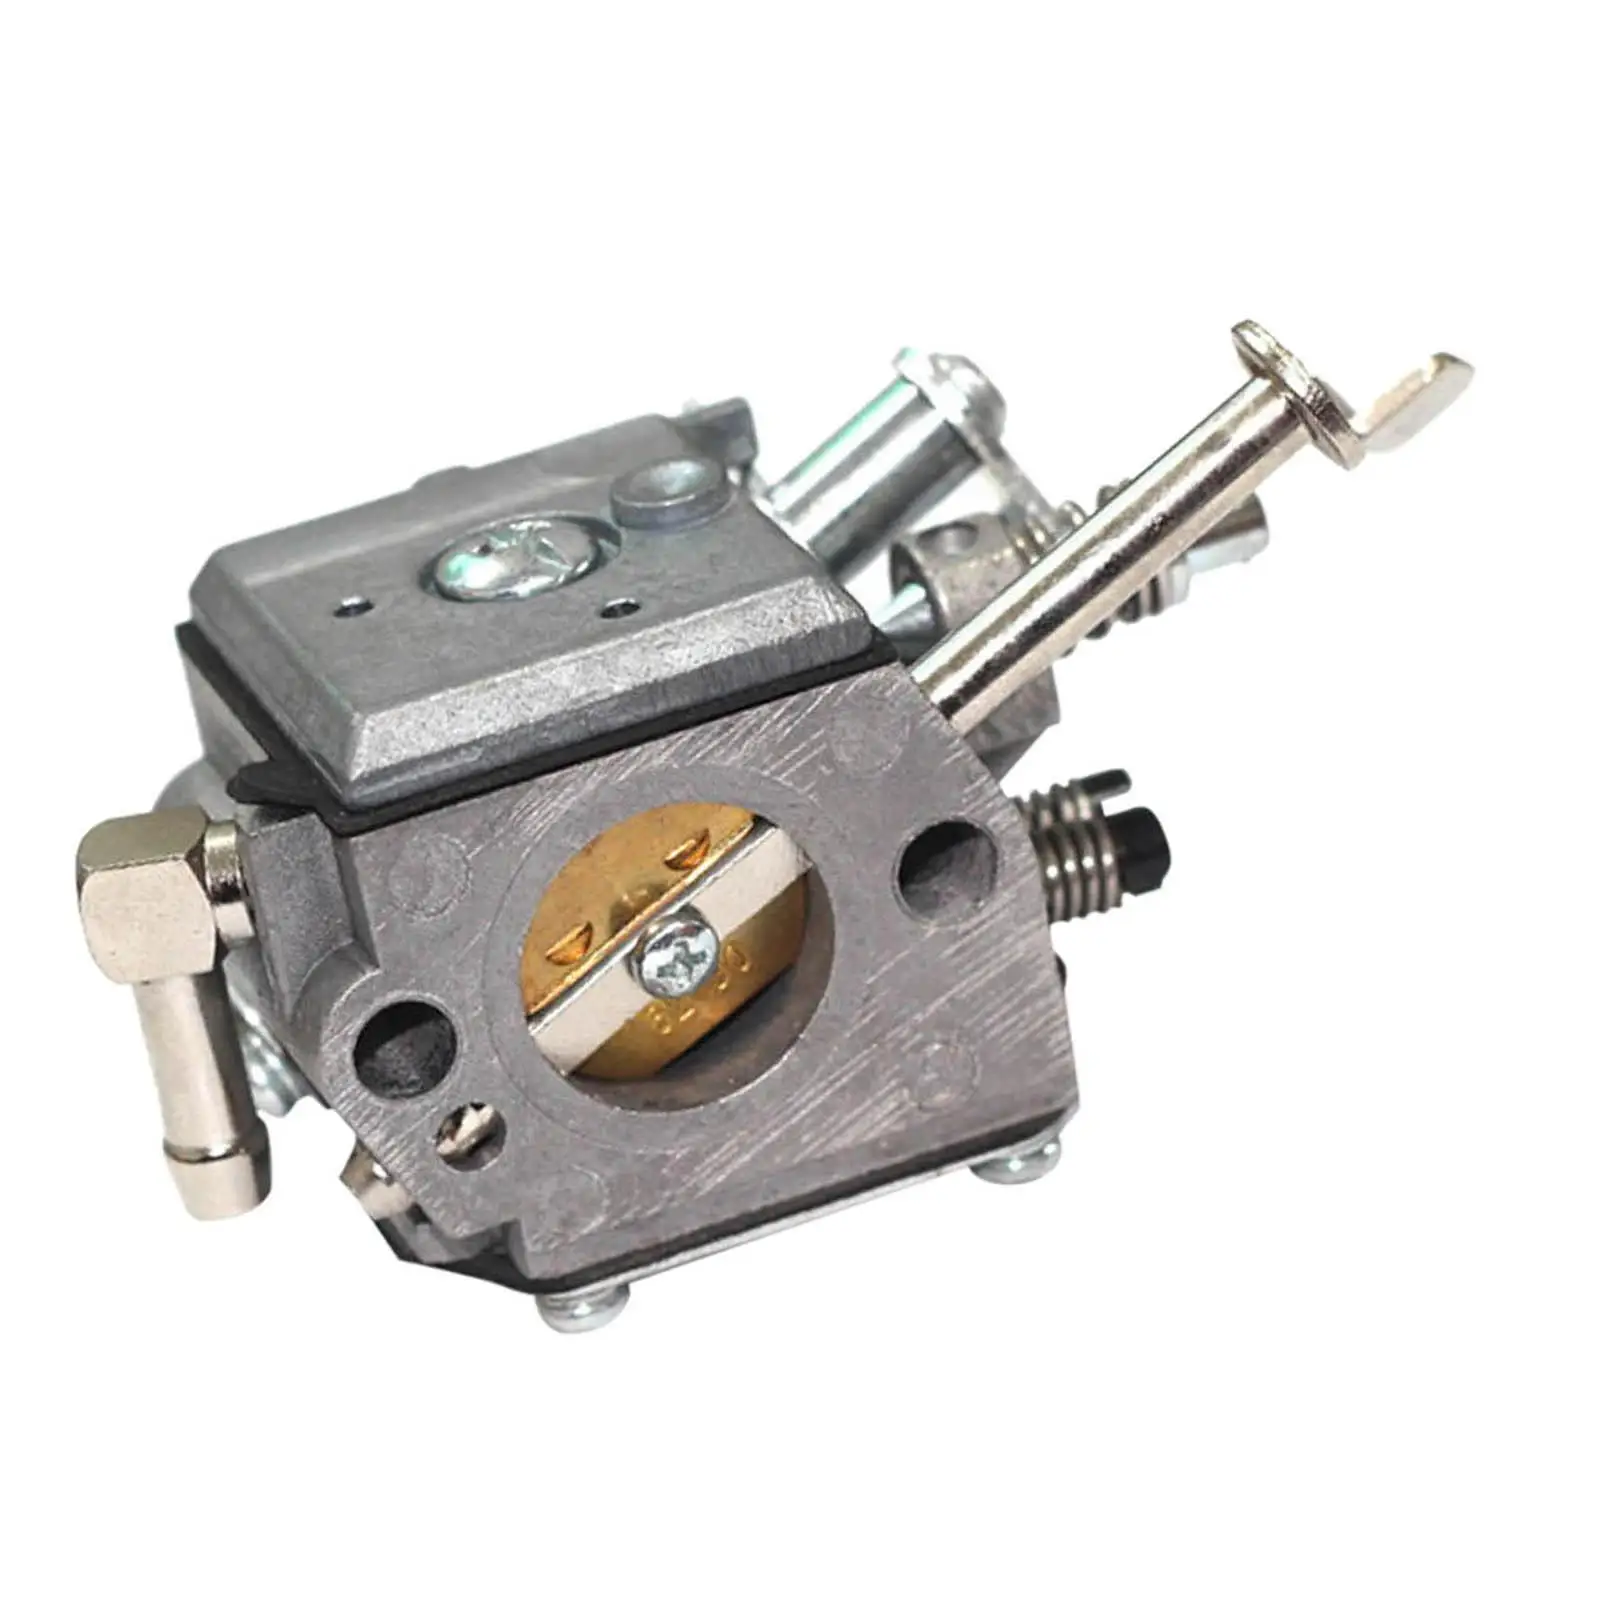 Carburetor Gx100 Direct Replaces Carb Air Filter Assembly for Gx100 16100-Z0D-V02 Easy to Install Durable Professional